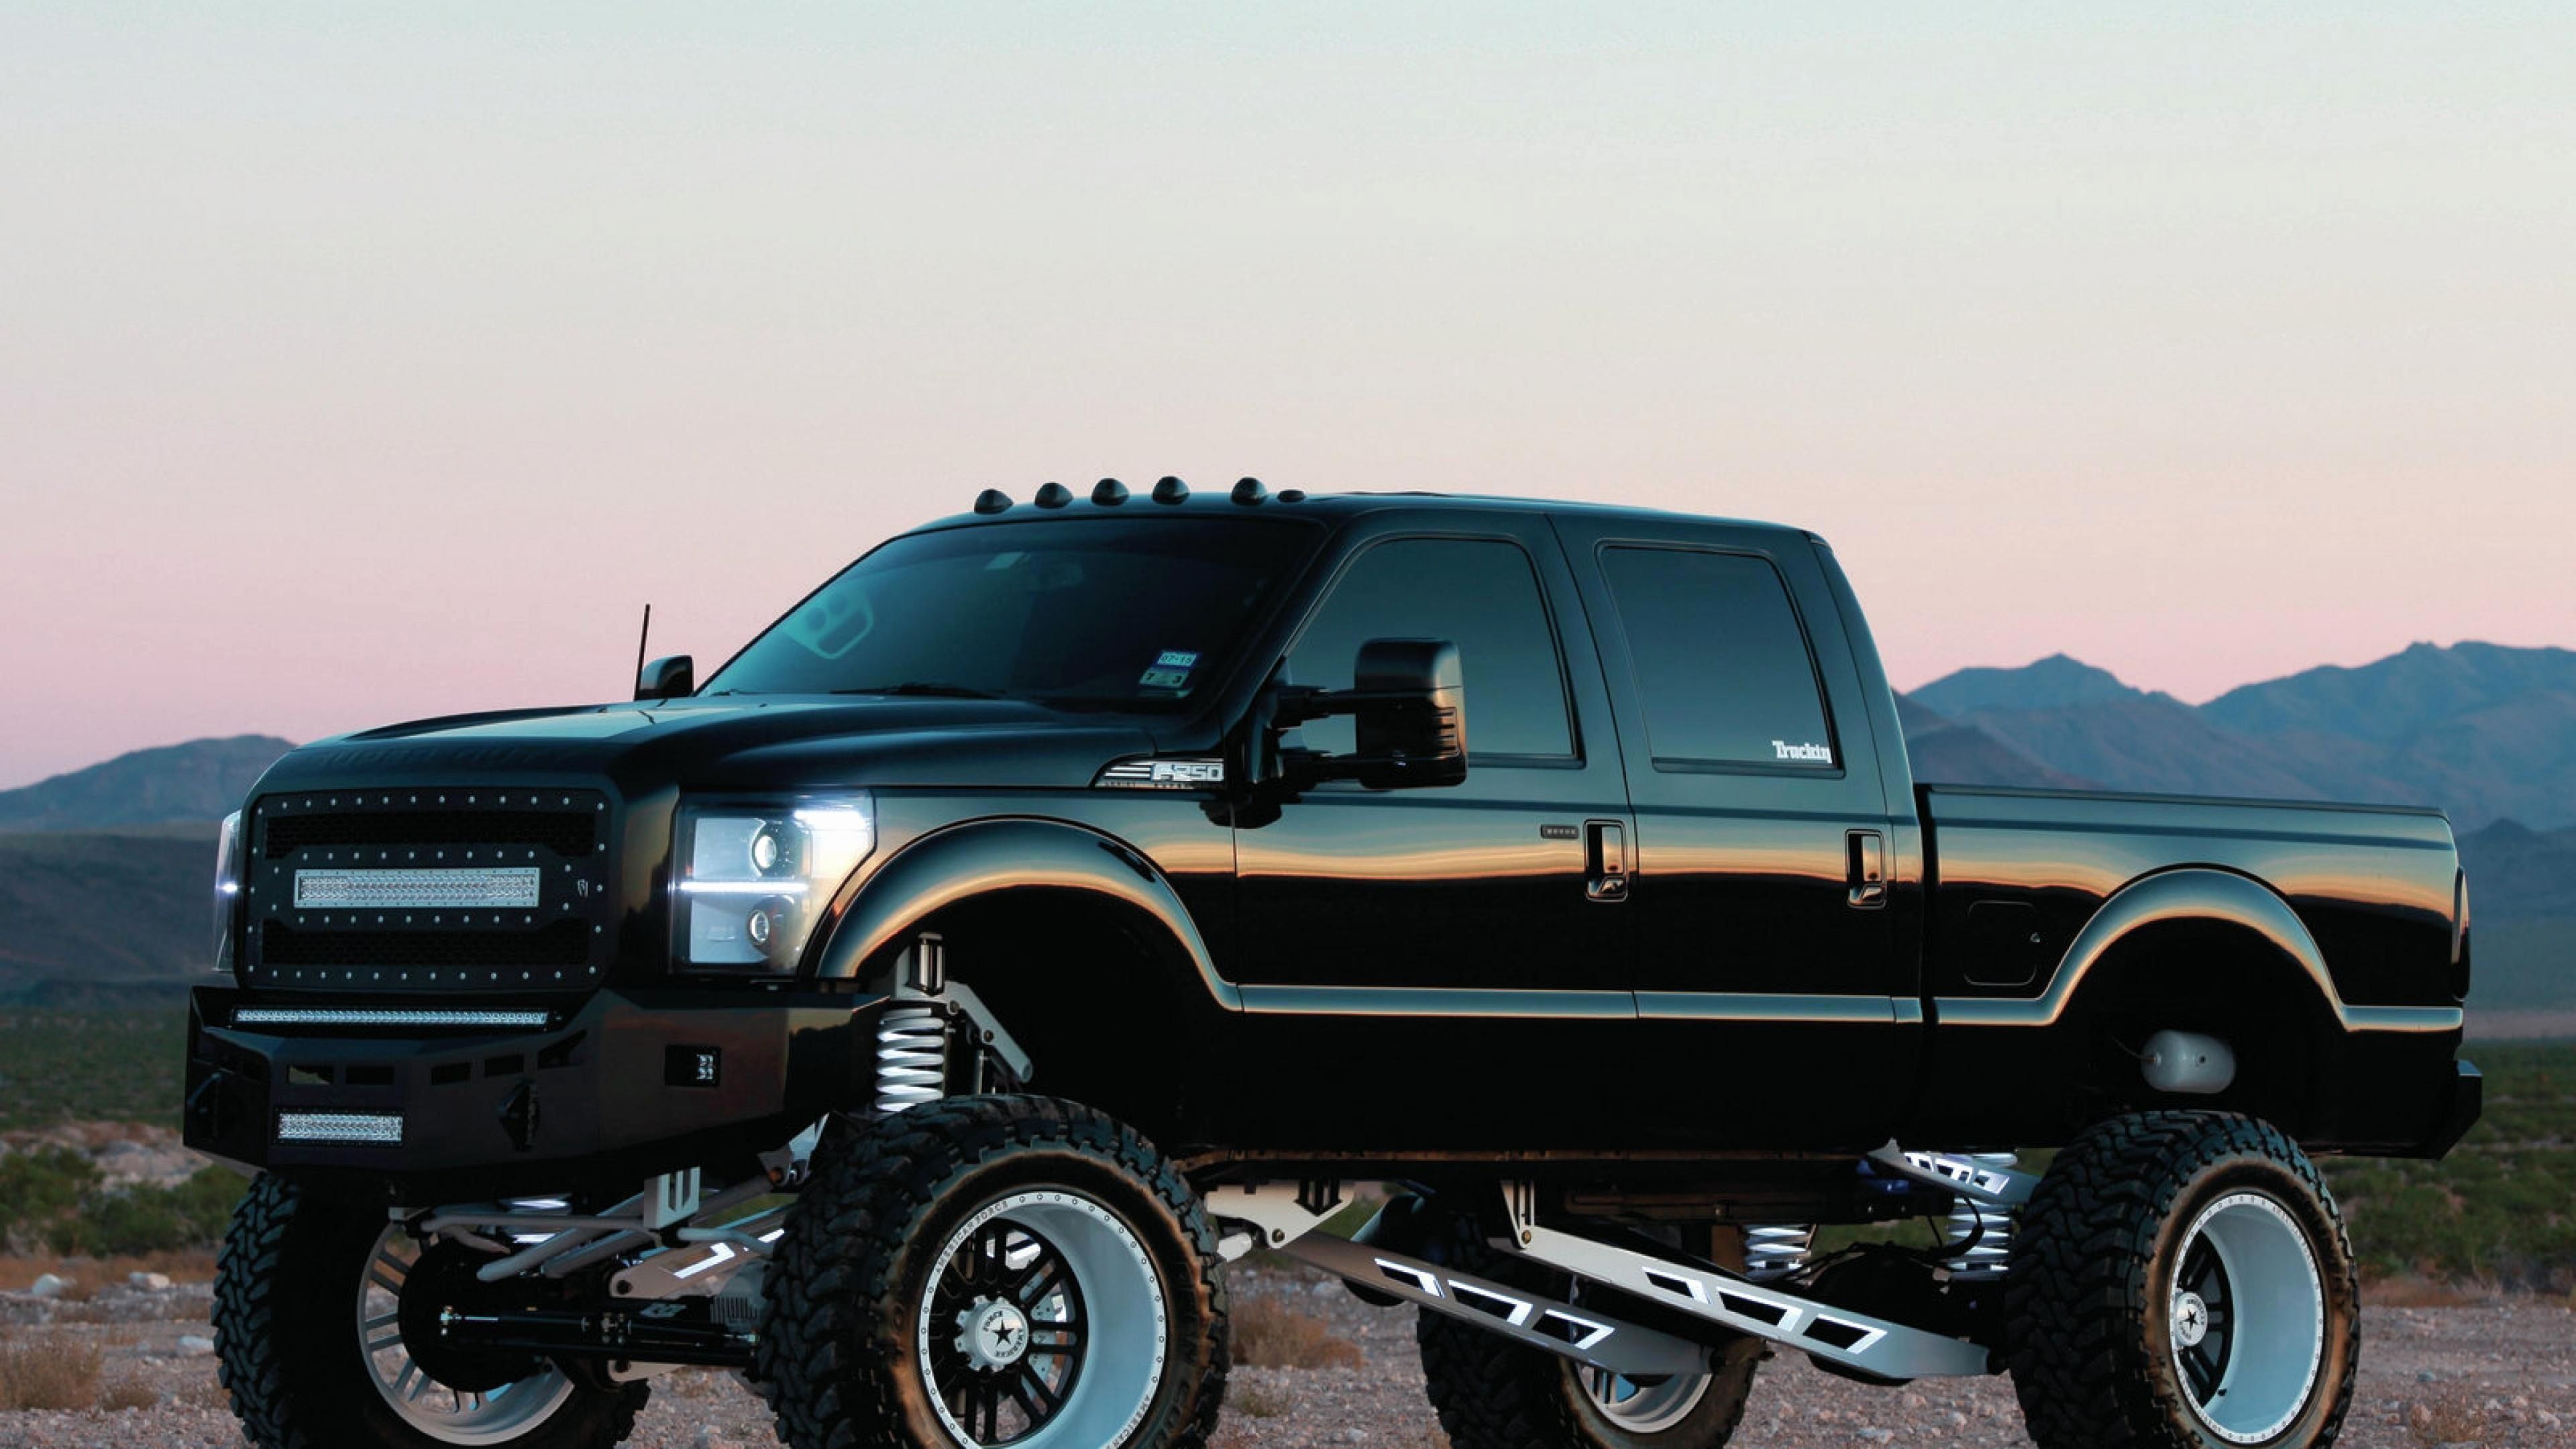 Diesel Truck Wallpapers New Lifted Trucks Wallpapers Wallpapers Cave Of t.....